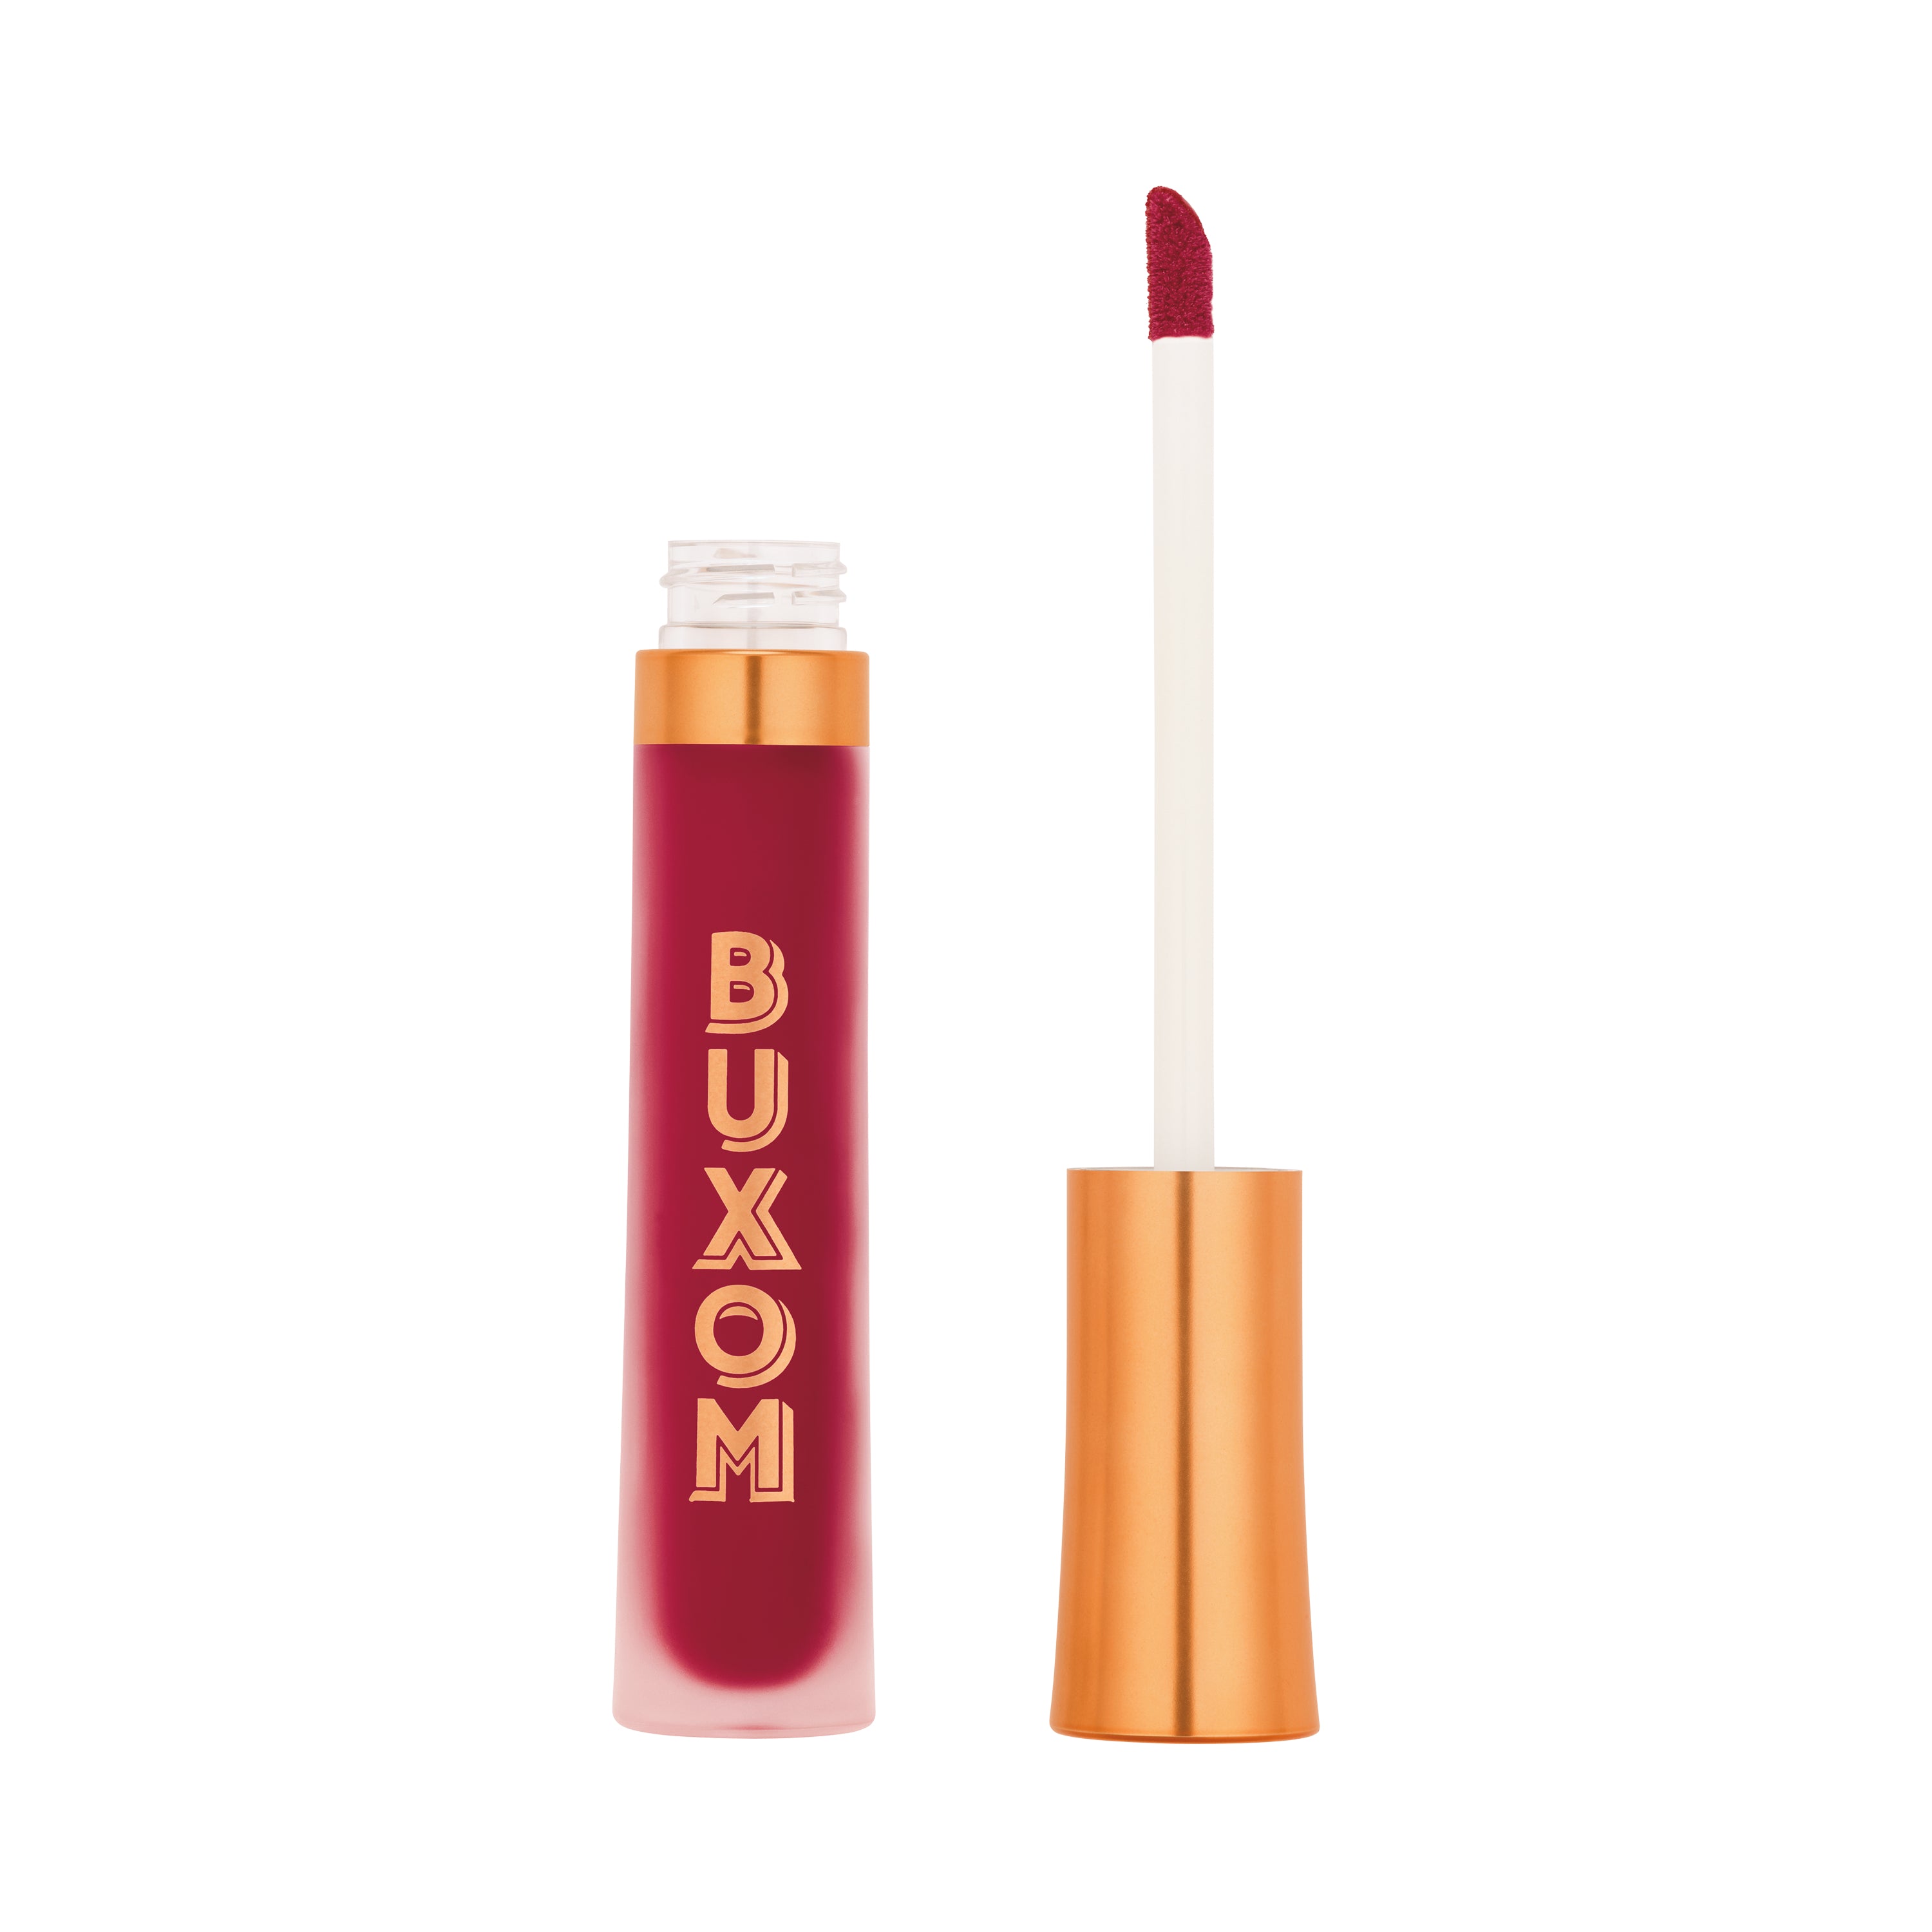 Keep It Spicy Full-On™ Plumping Lip Matte